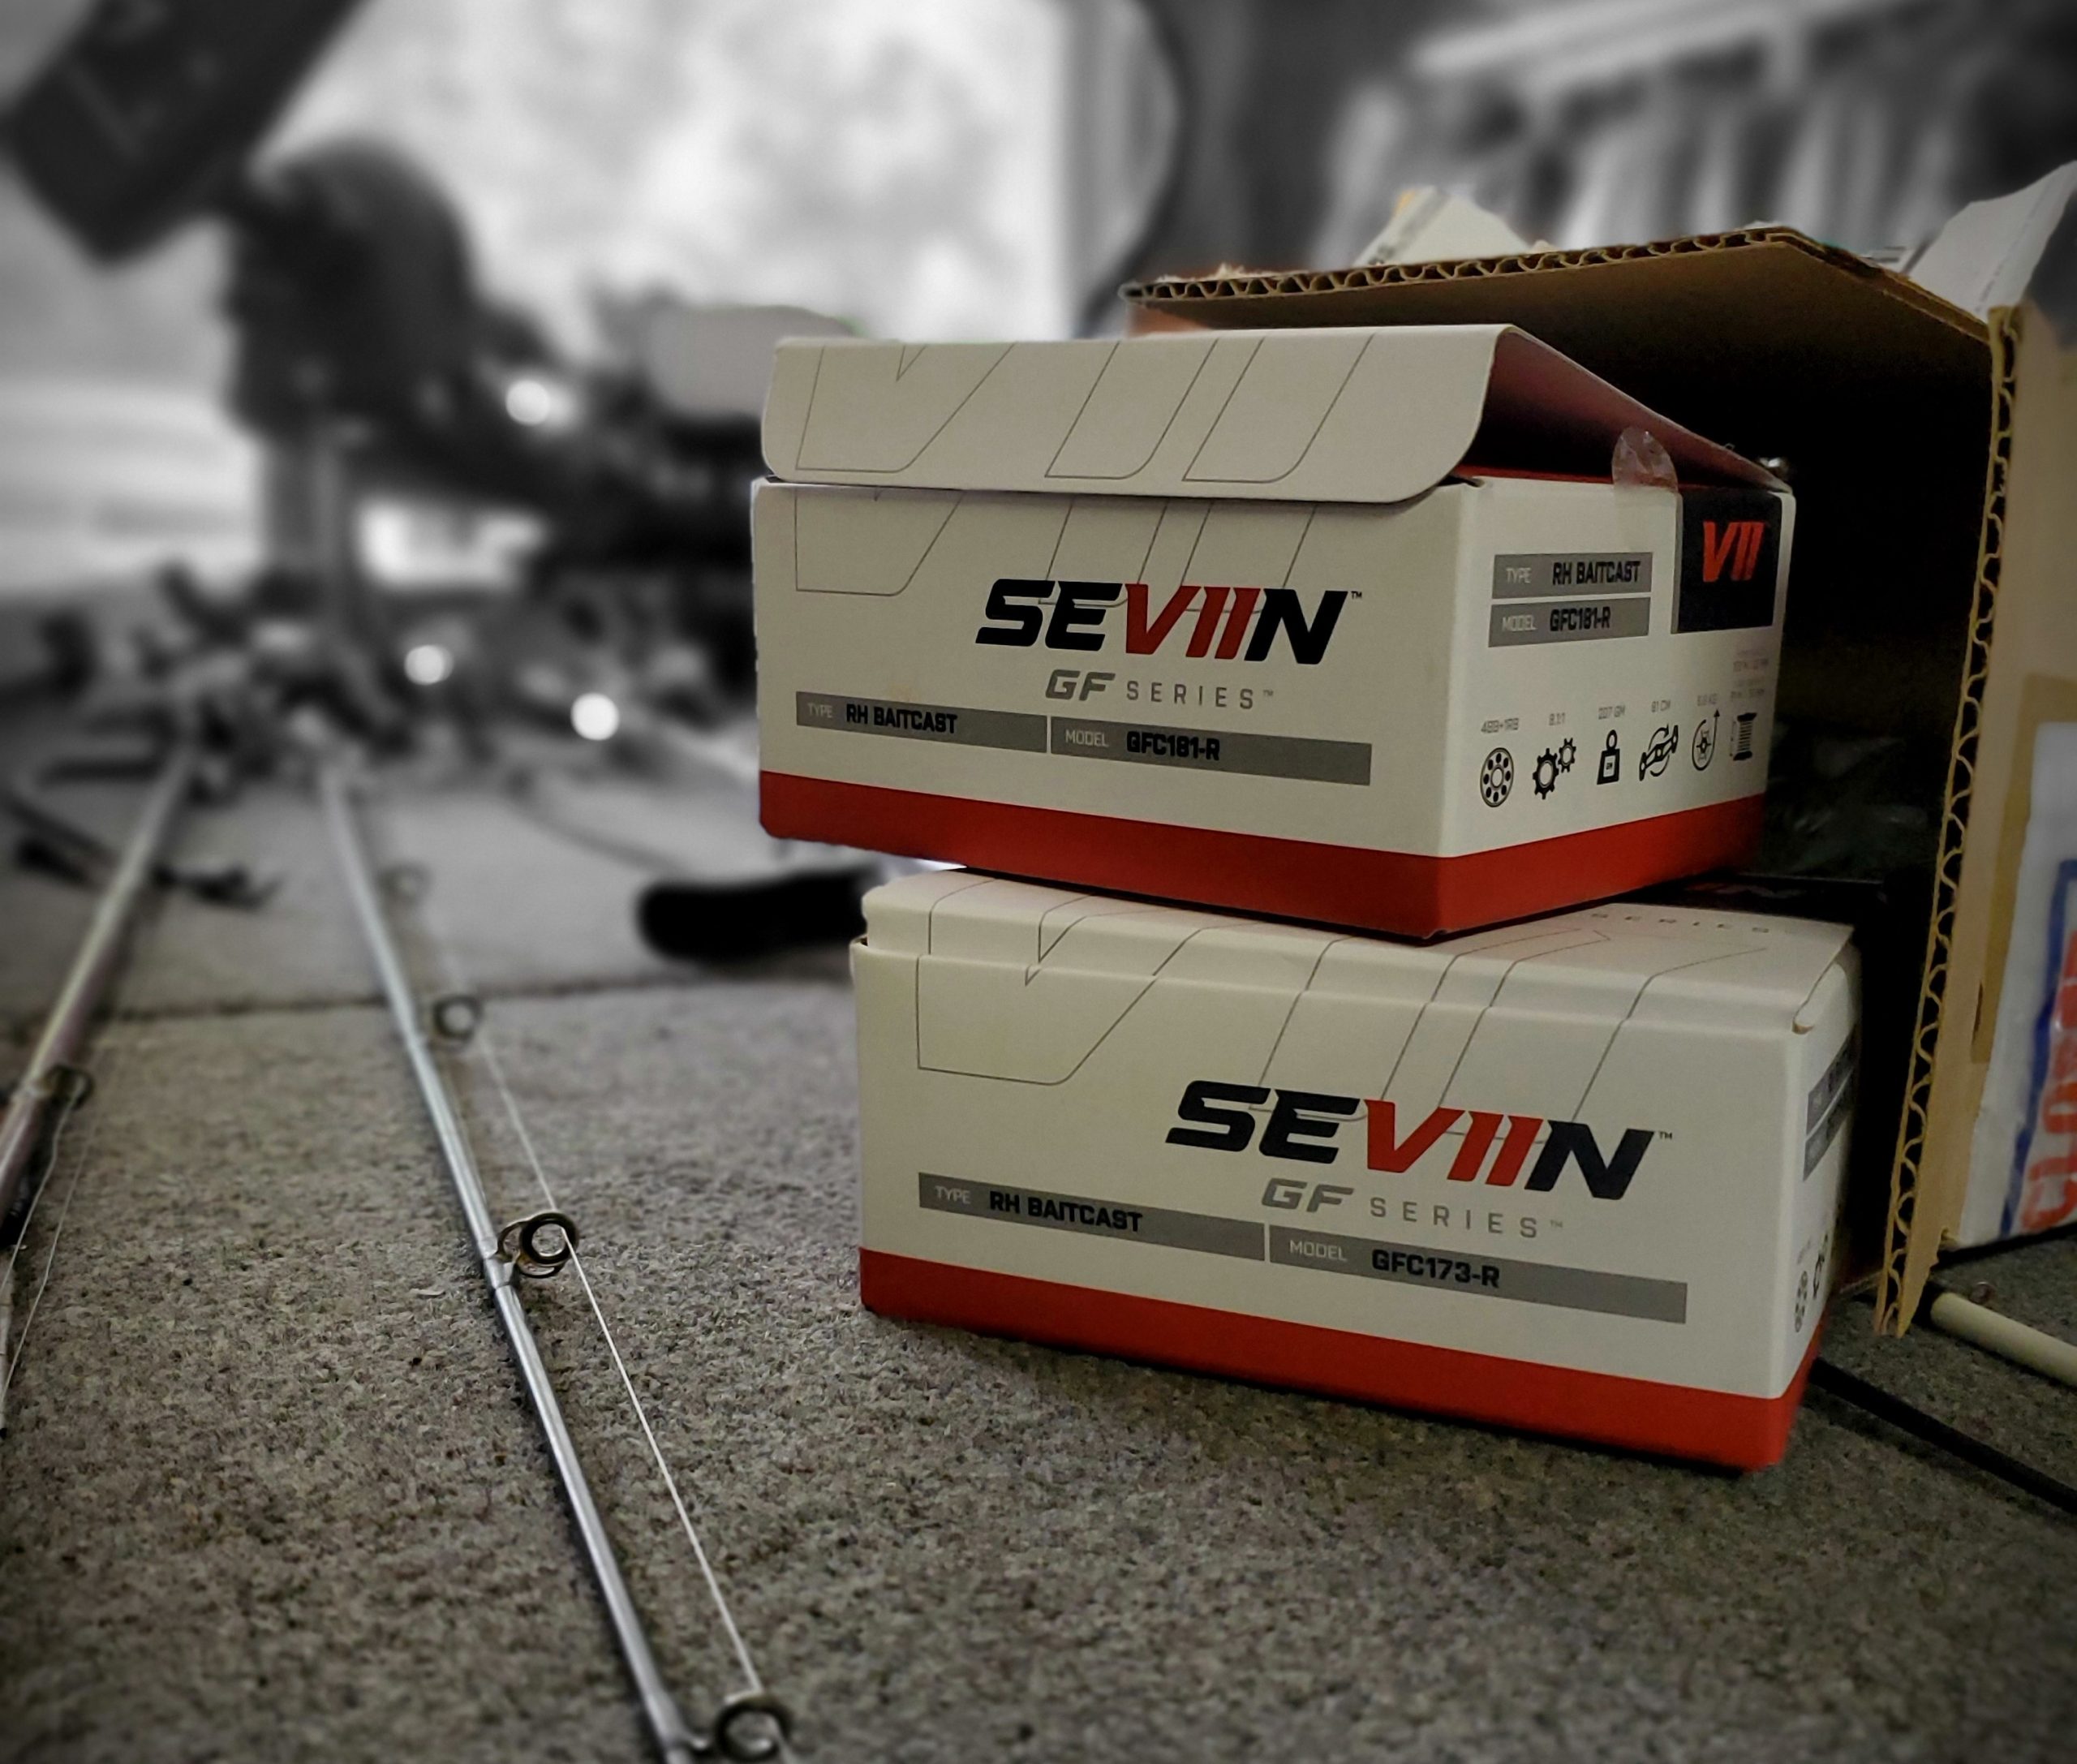 Fall Fishing with the new Seviin GF Series Baitcaster – Anglers Channel